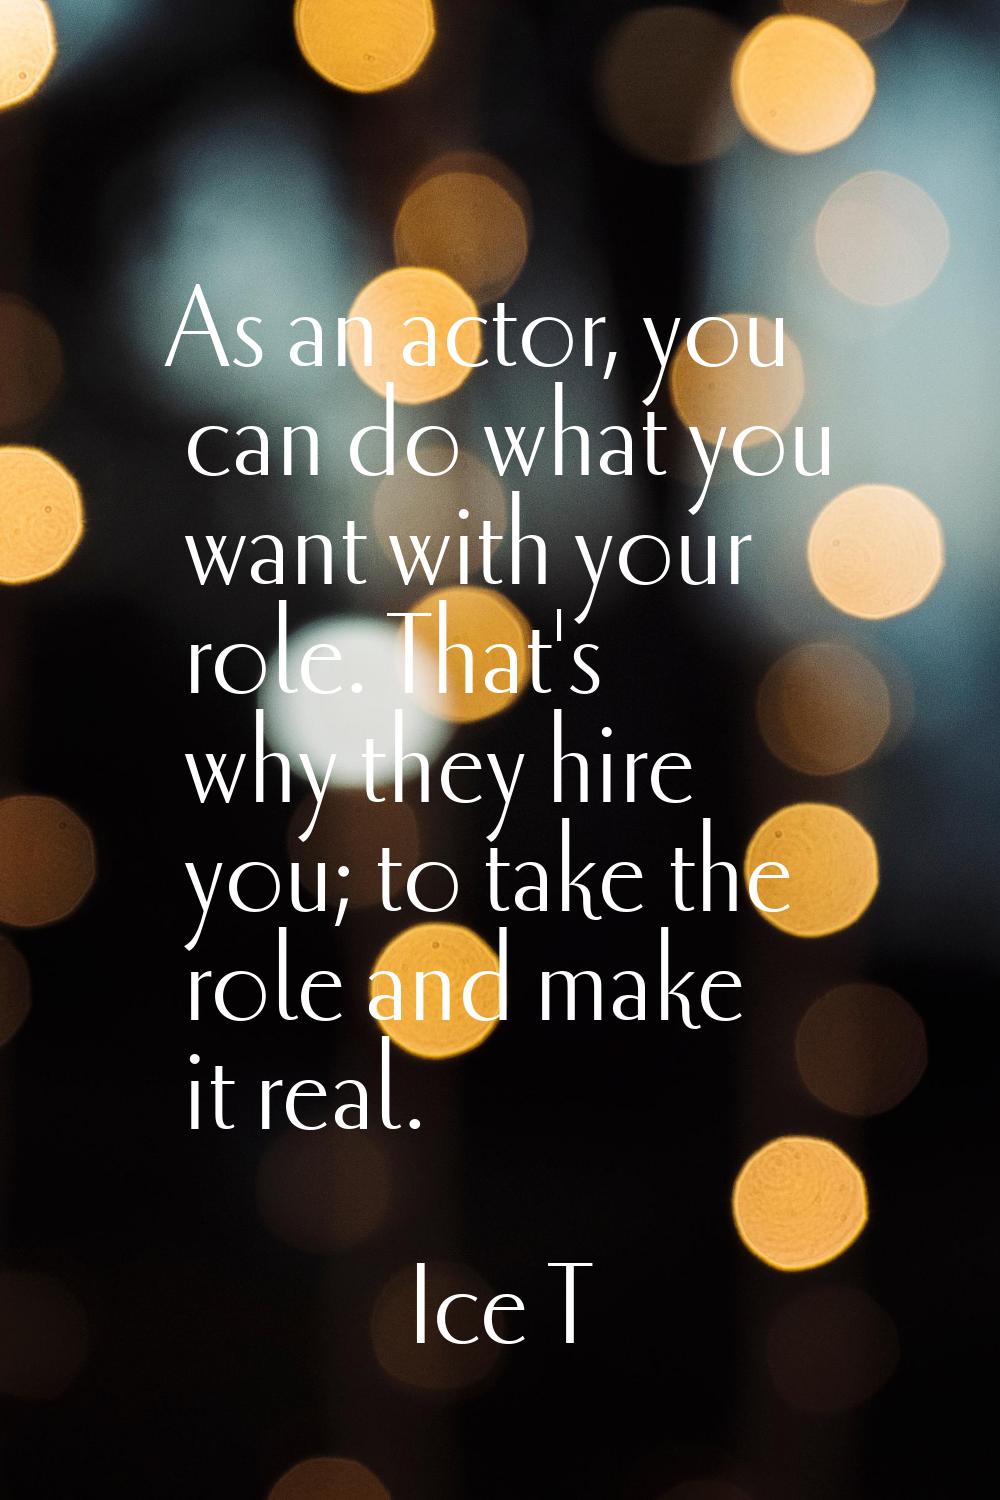 As an actor, you can do what you want with your role. That's why they hire you; to take the role an